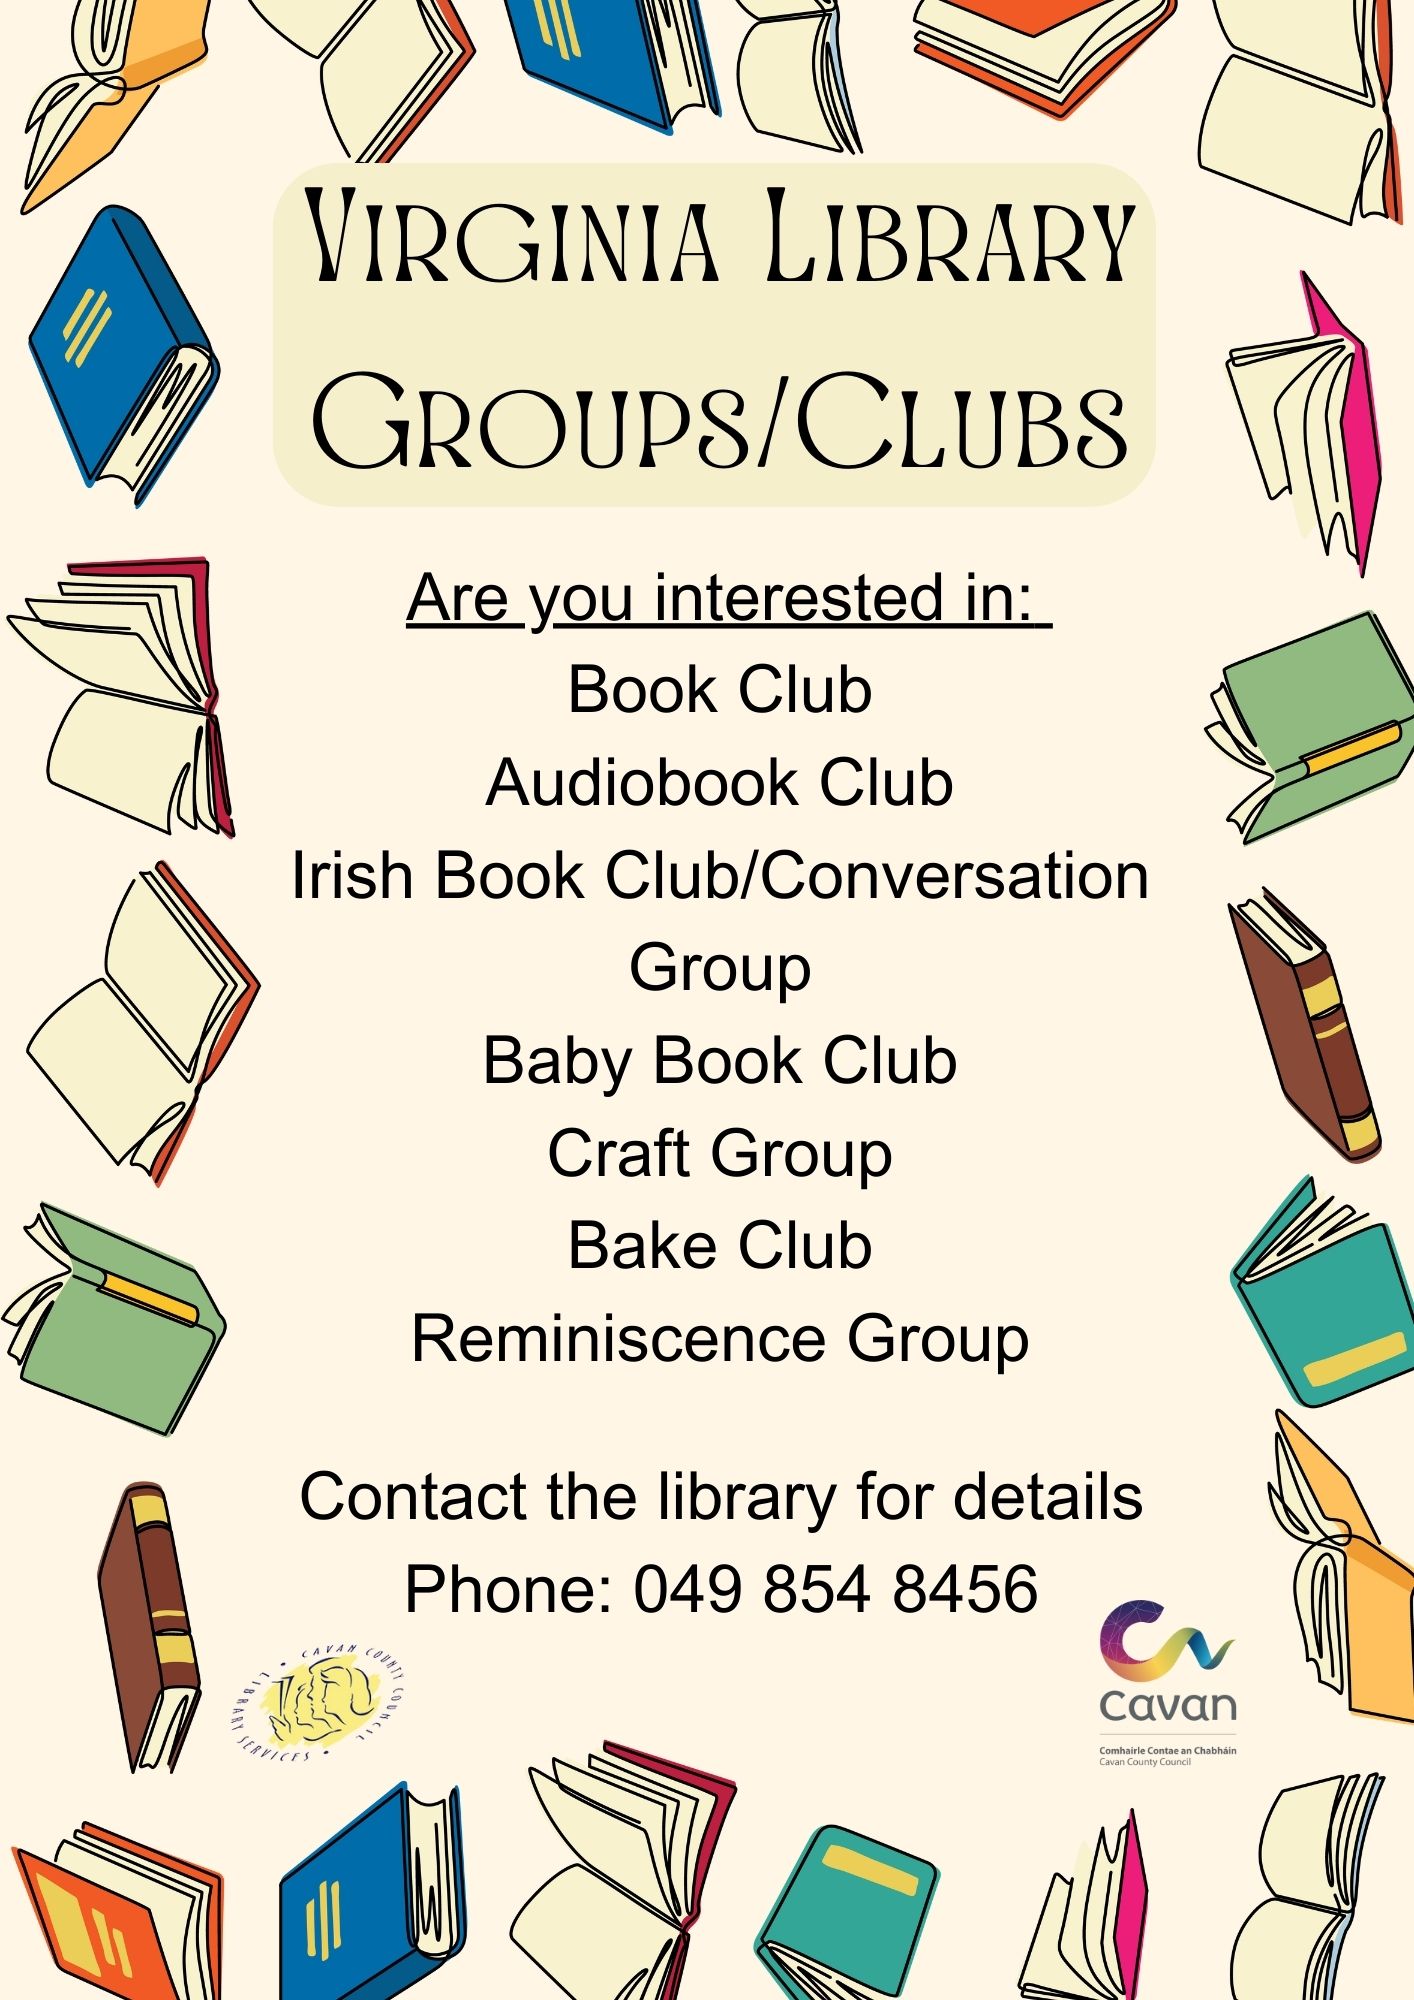 Library-groupsclubs